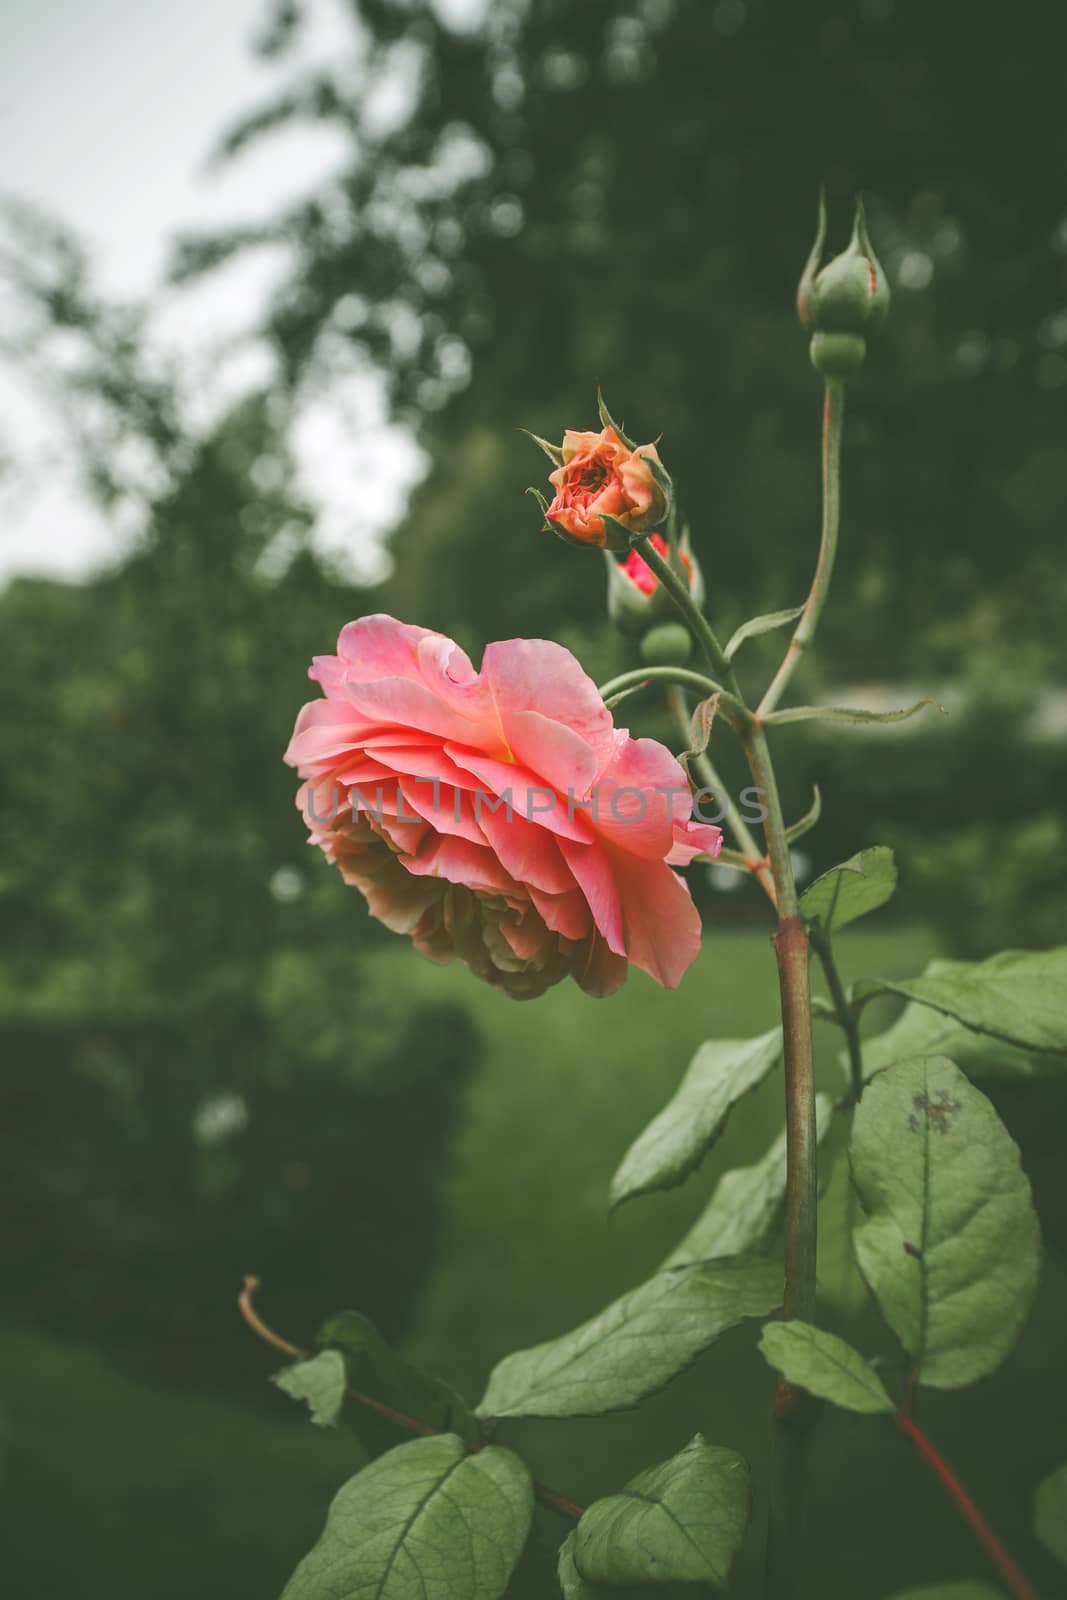 Pink rose in a green garden on a cloudy day by Sportactive